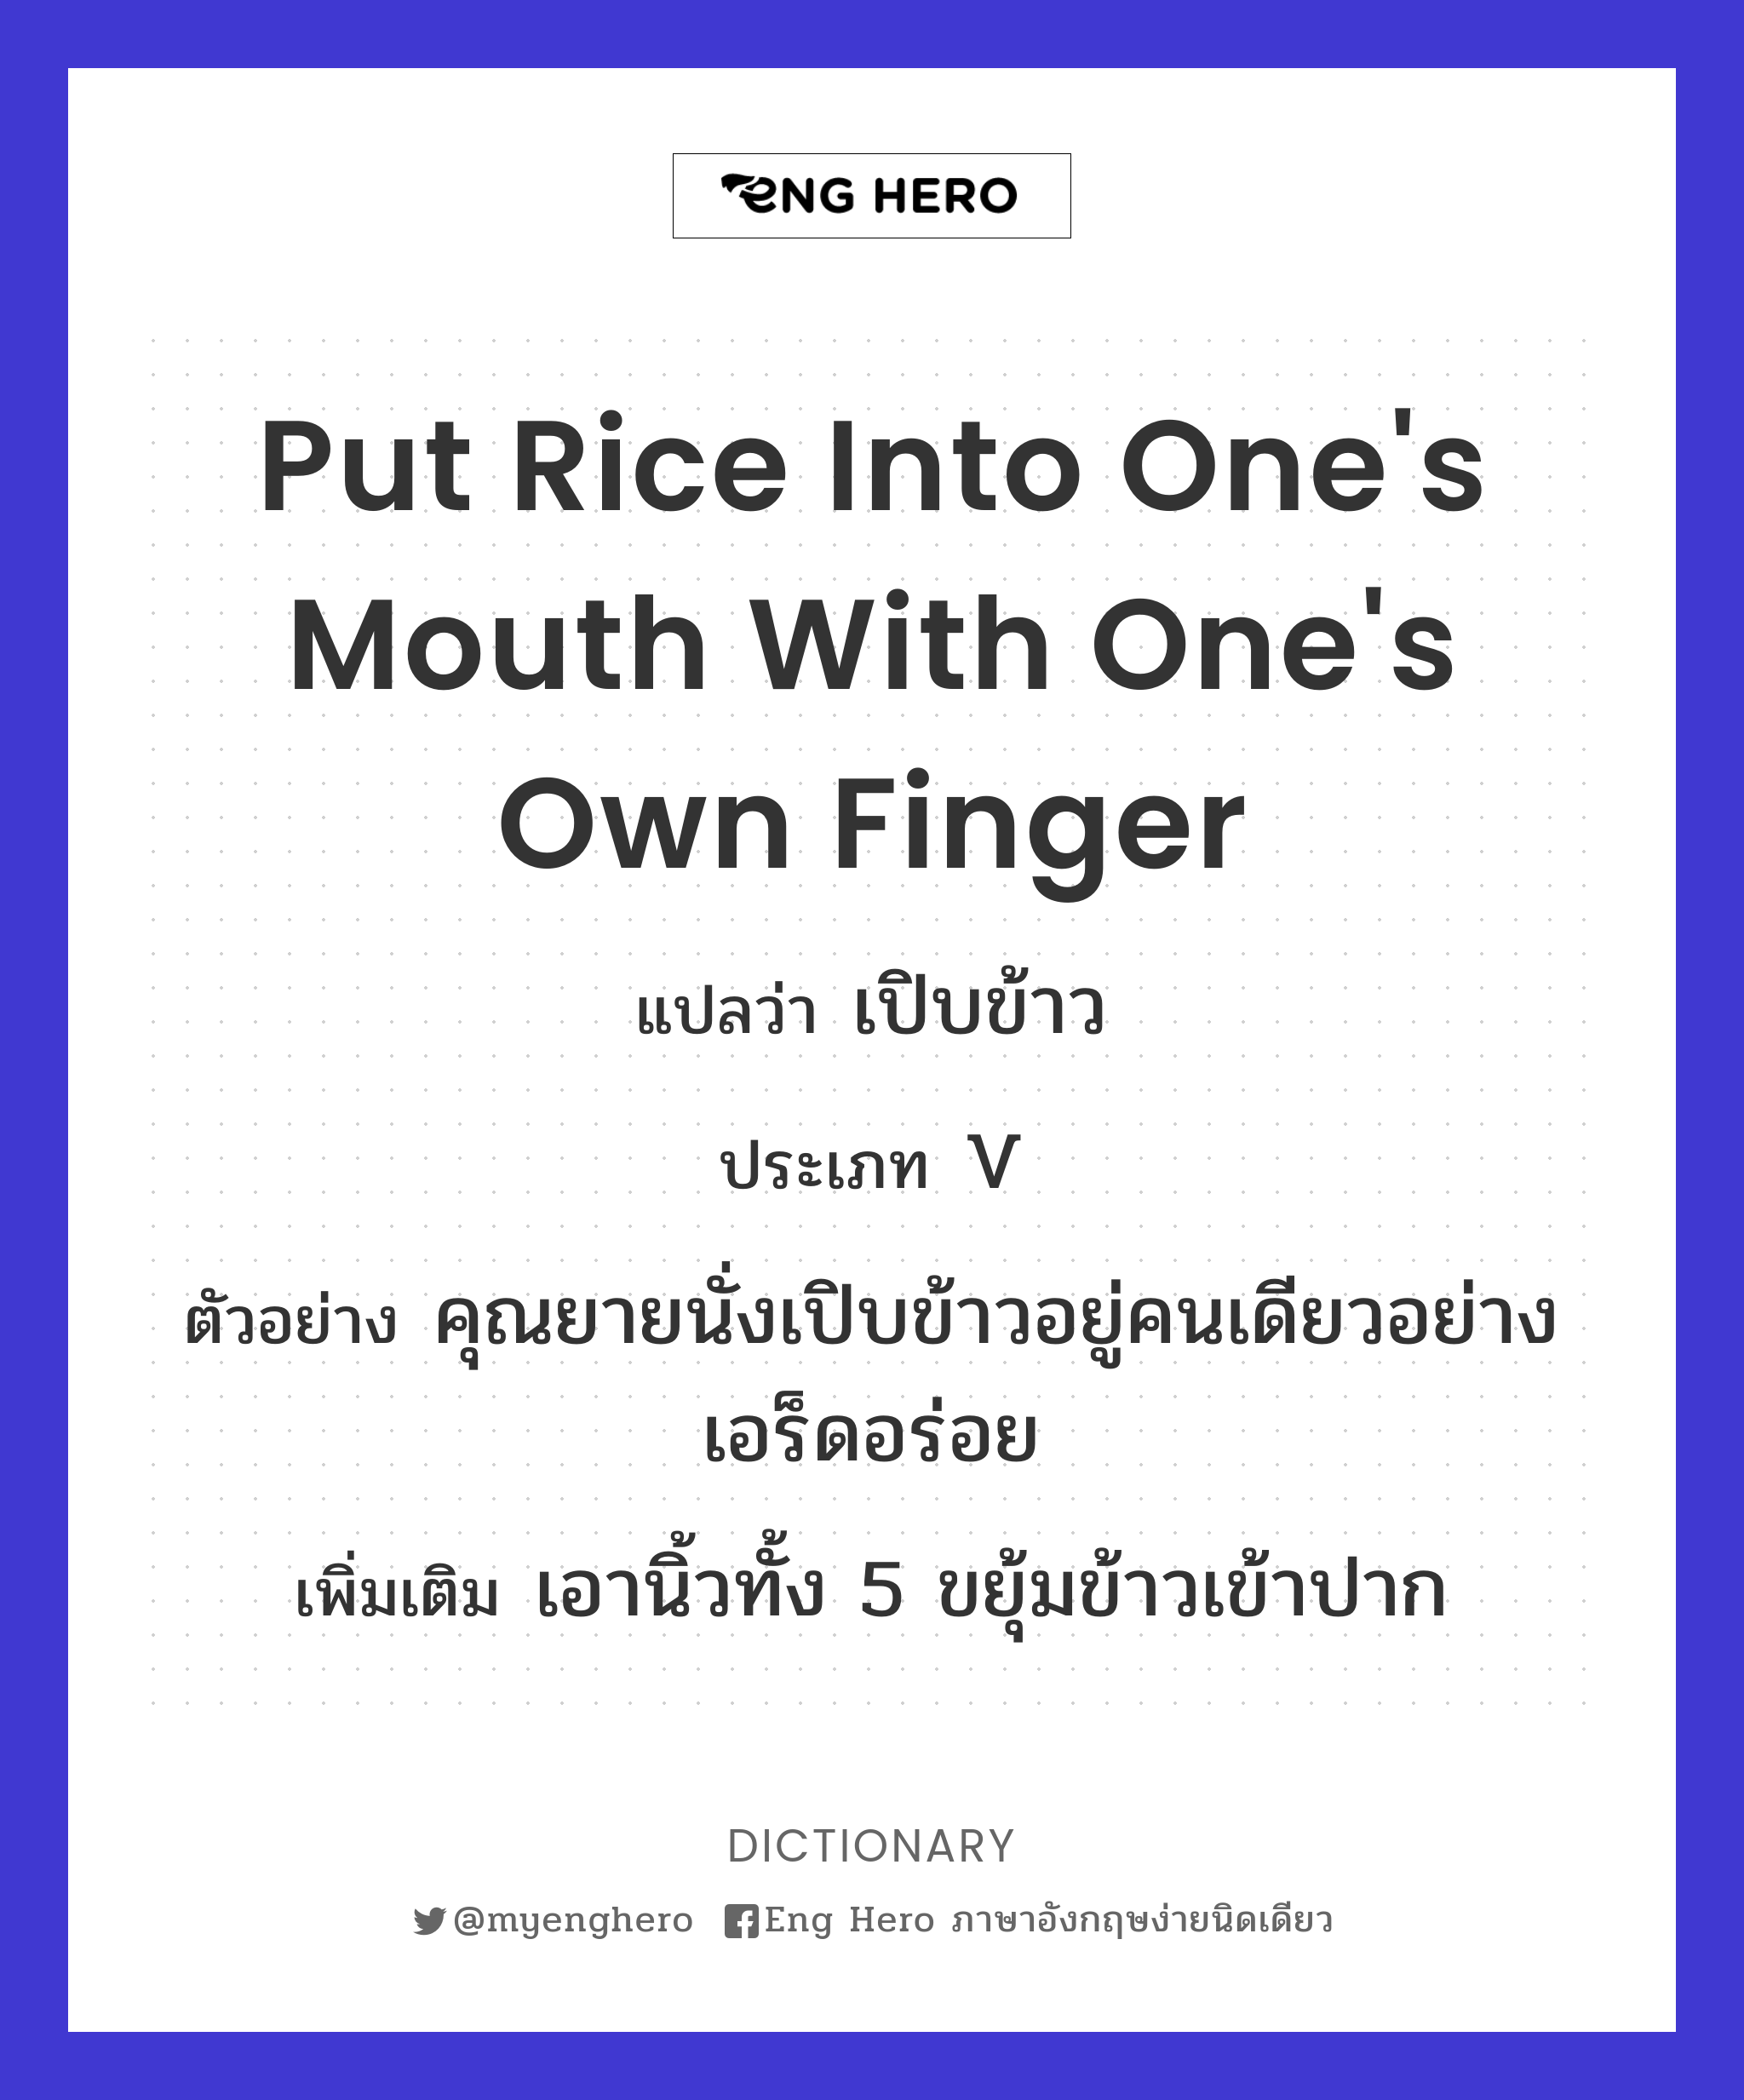 put rice into one's mouth with one's own finger